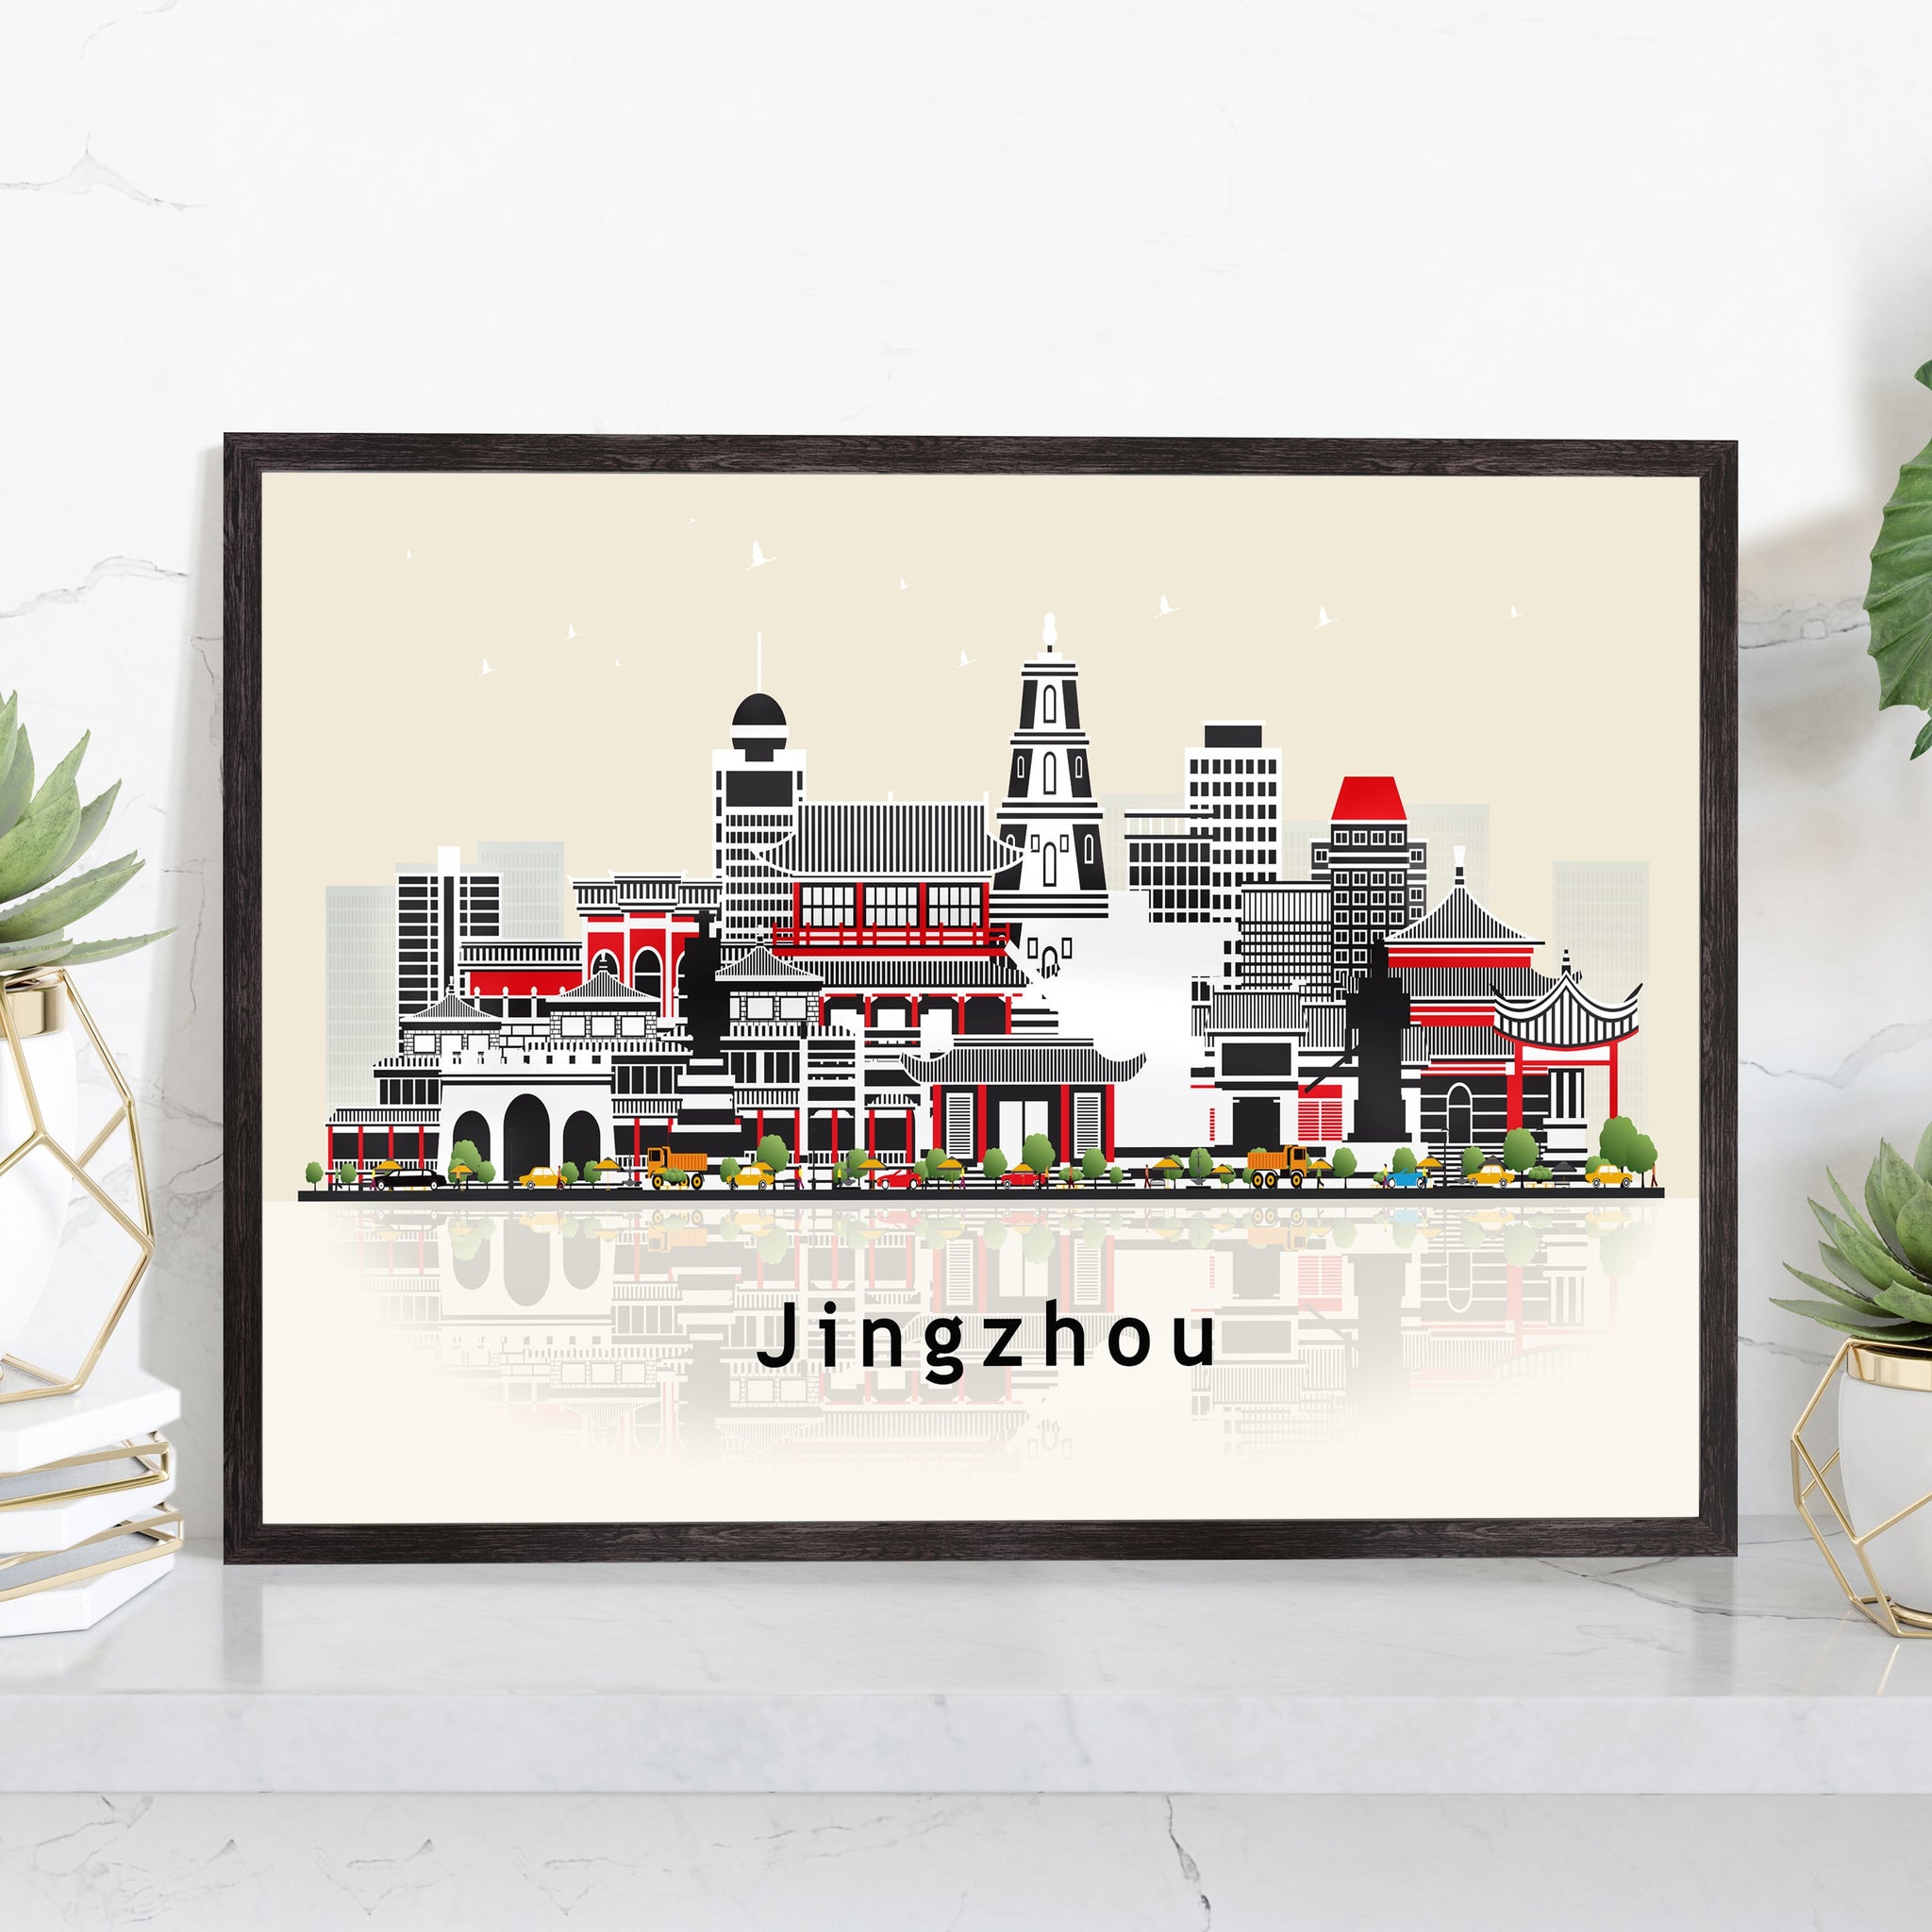 JINGZHOU CHINA Illustration skyline poster, Modern skyline cityscape poster, China city skyline landmark map poster, Home wall decoration